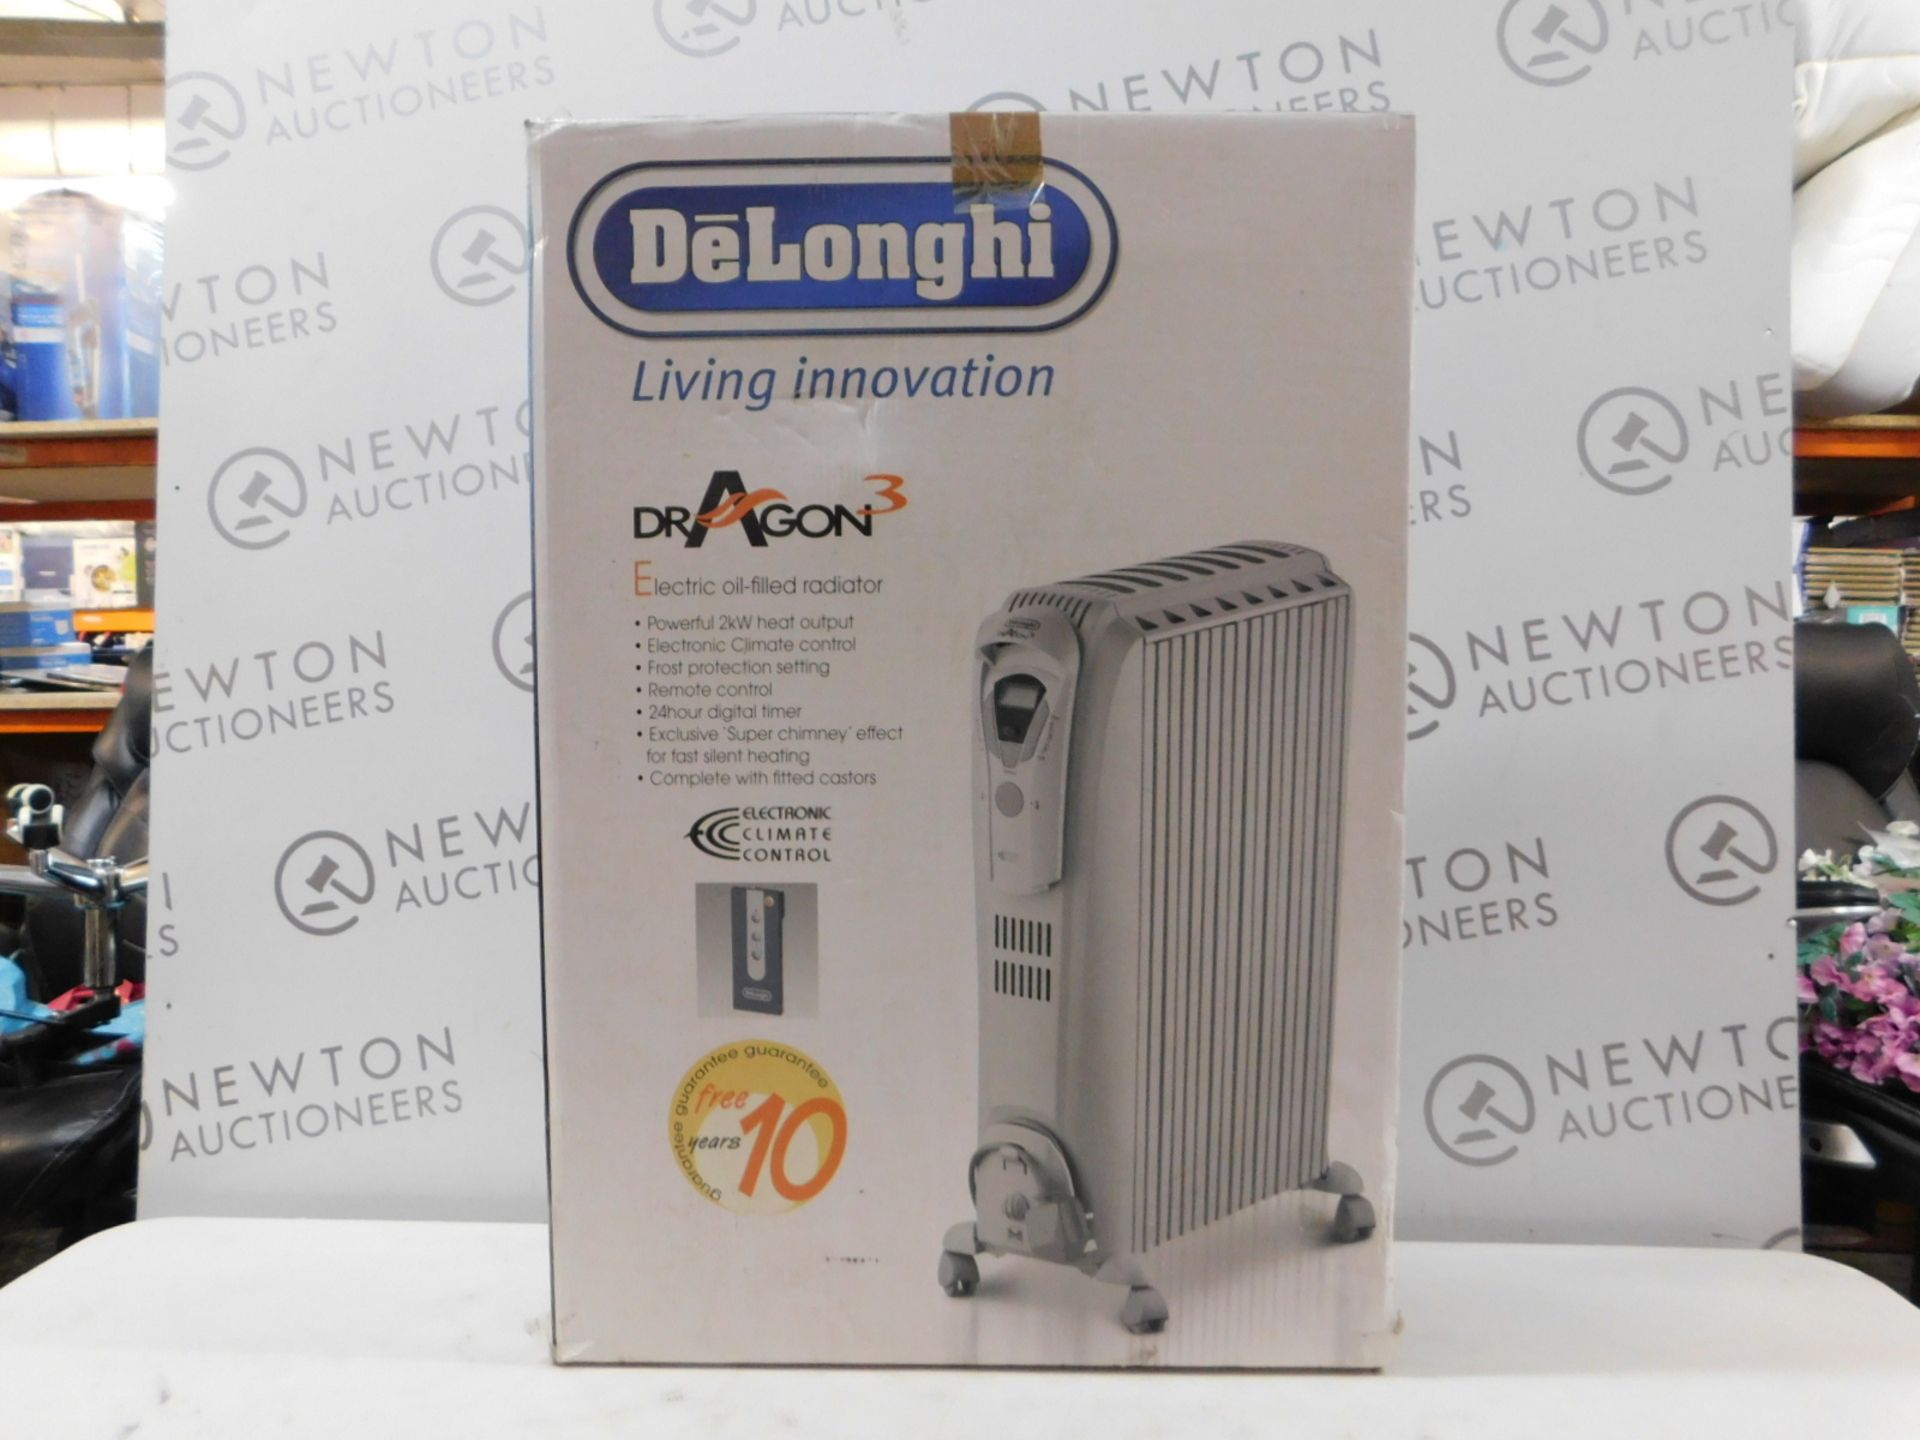 1 BOXED DELONGHI DRAGON 3 ELECTRIC OIL FILLED RADIATOR RRP Â£129.99